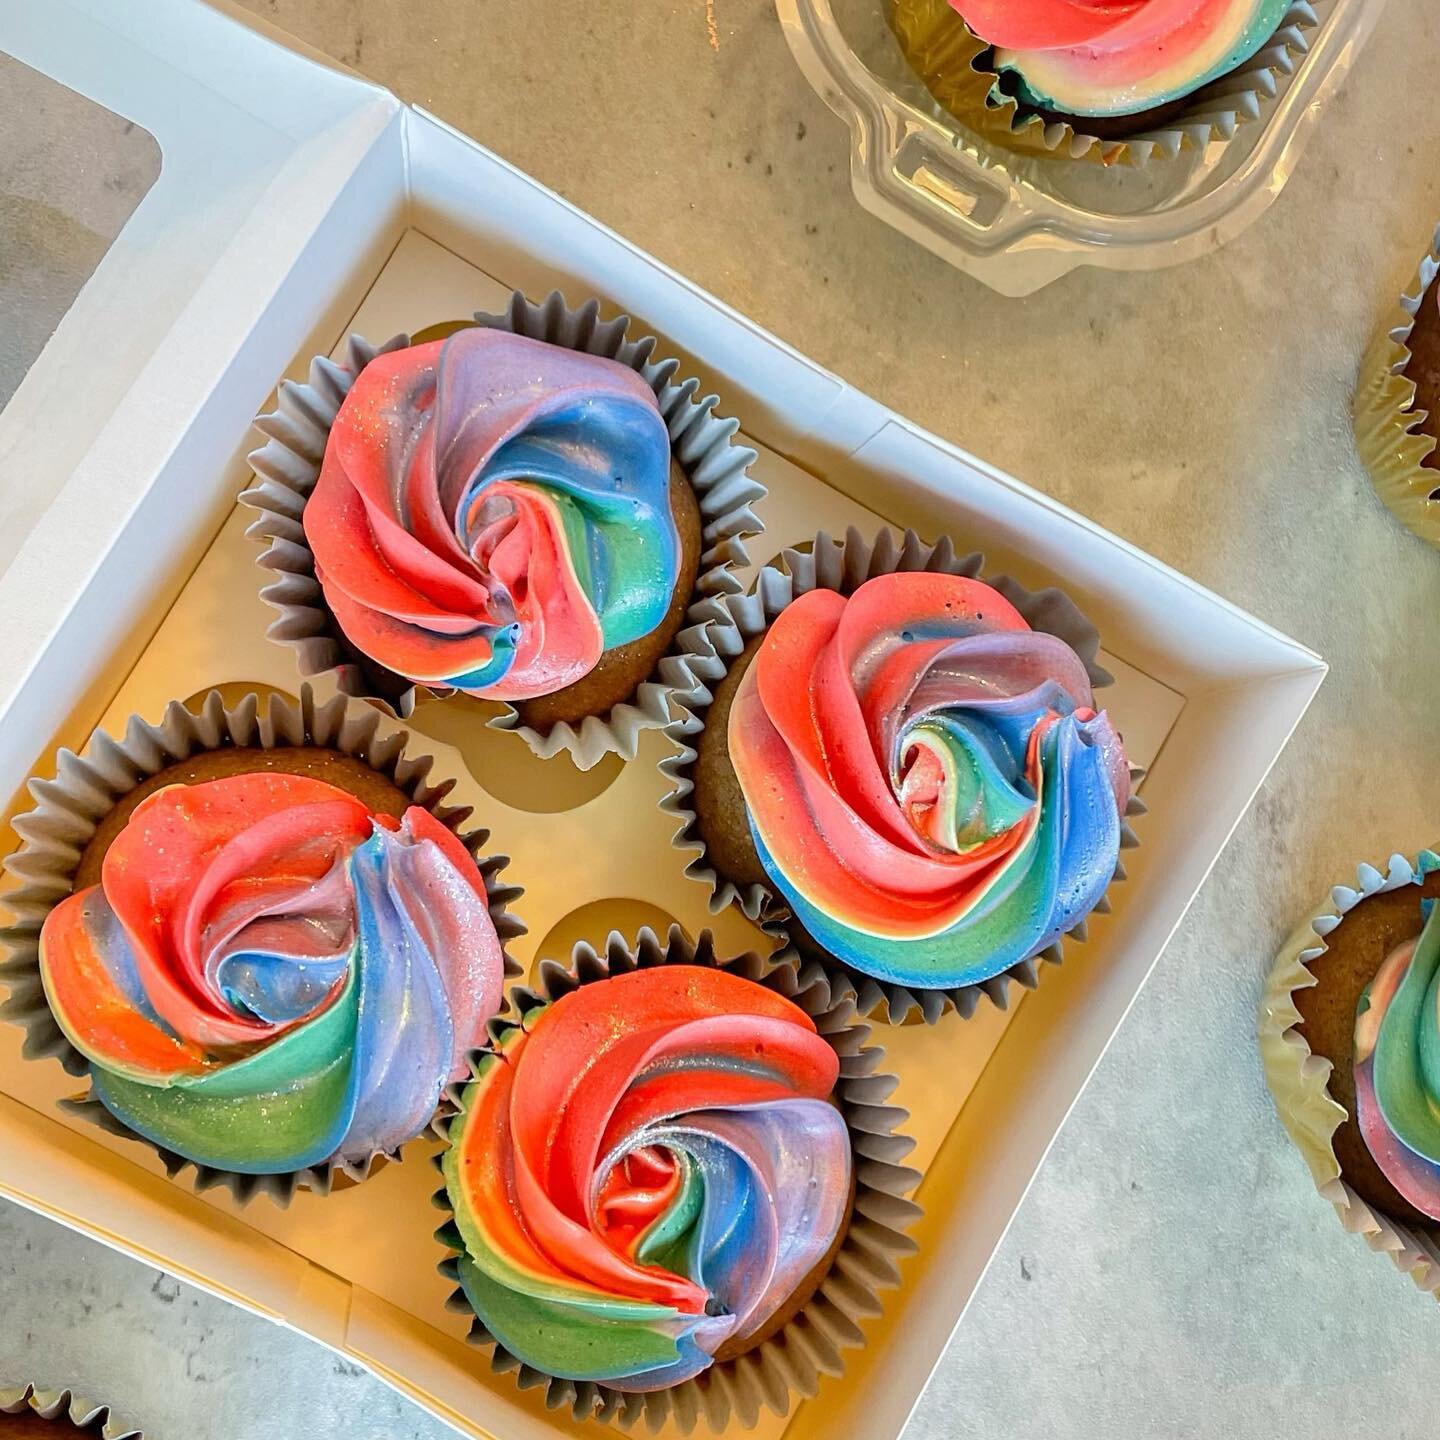 🌈 🧁 ✨Happy Pride Month ✨🧁🌈

June is just one month out of the whole year where we can show support to our LGBTQ+ communities 🏳️&zwj;🌈 one of our NUMS YUMS team members just recently launched her own social media branding business @the.mercadost